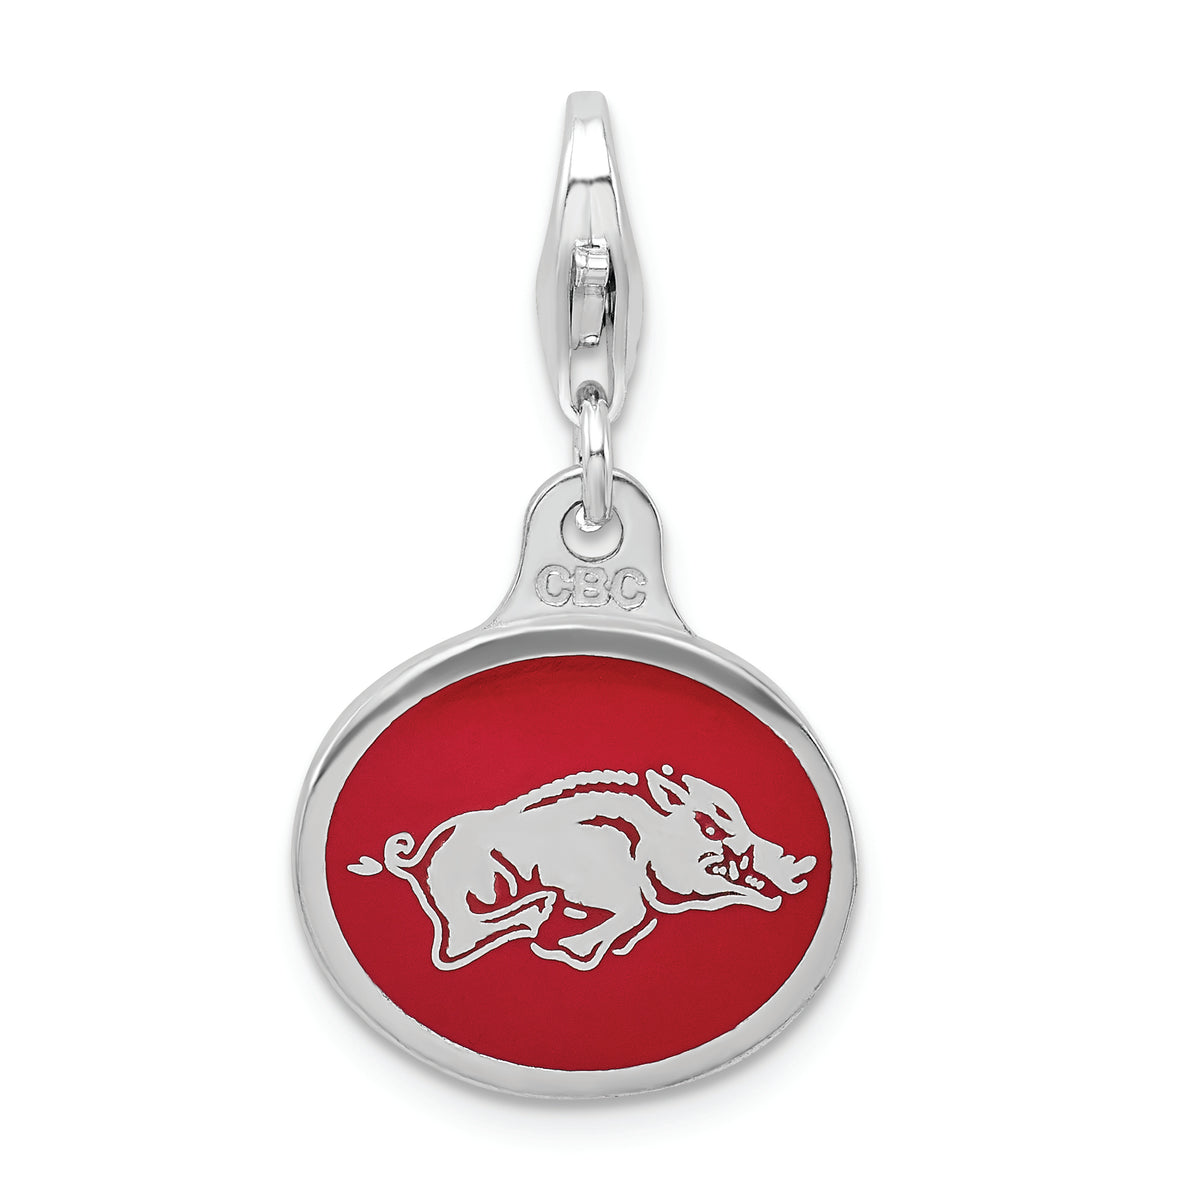 Amore La Vita Sterling Silver Rhodium-plated Polished Enameled University of Arkansas Charm with Fancy Lobster Clasp